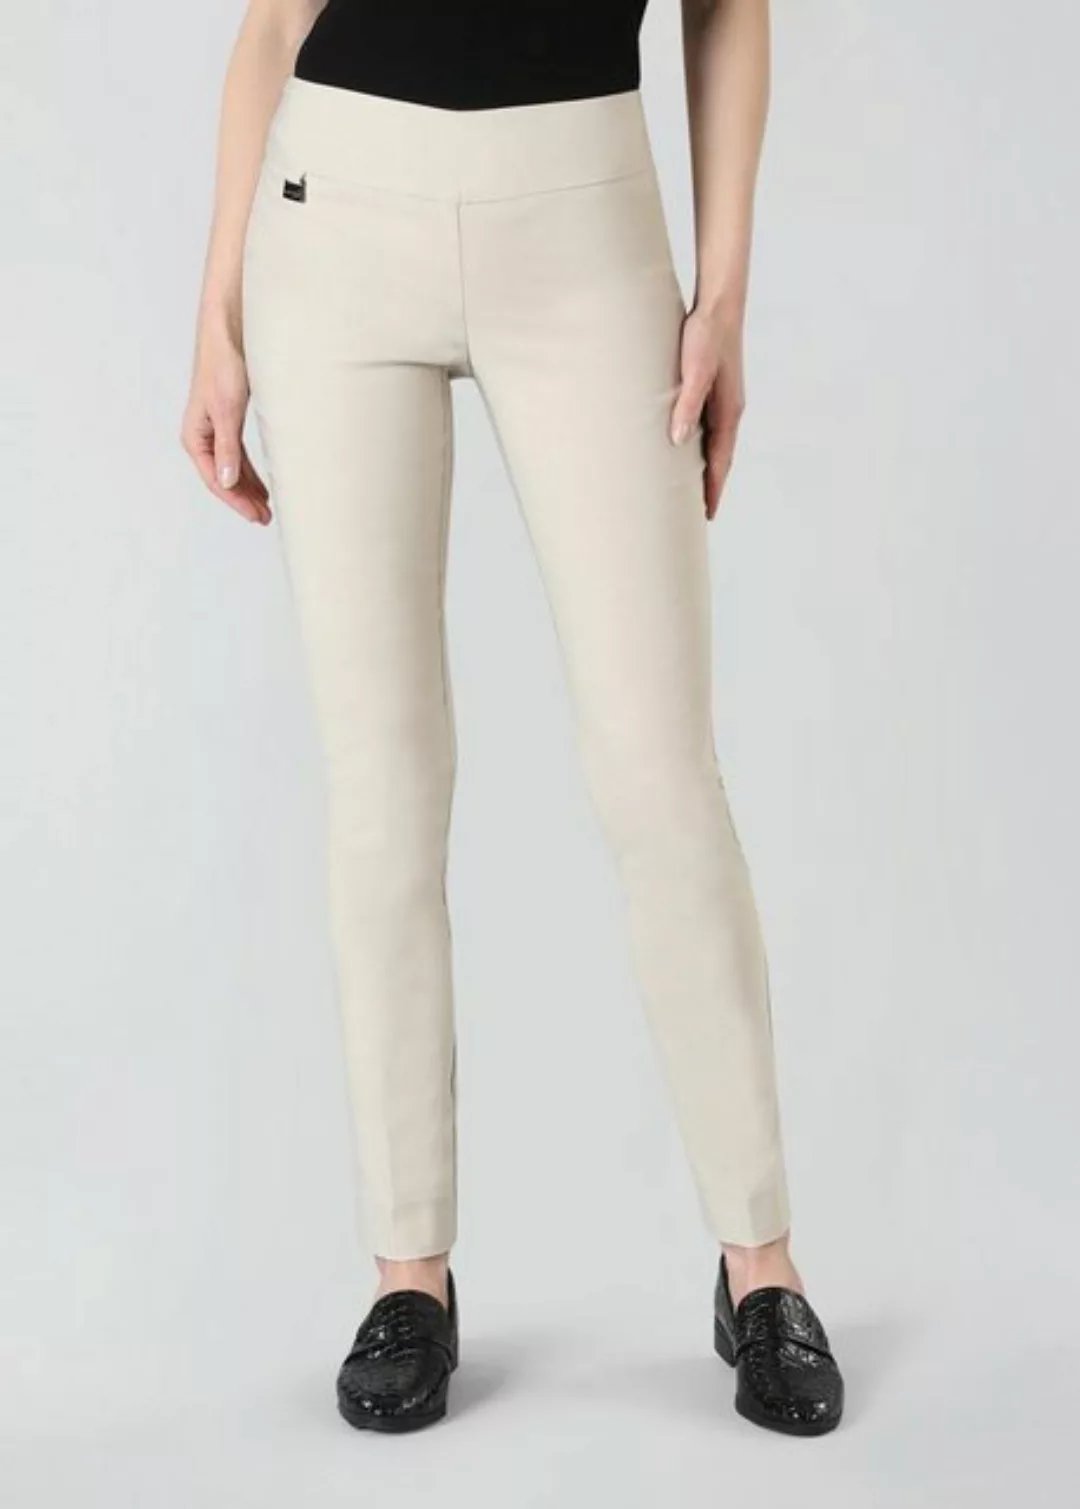 Lisette L Chinohose Perfect fitting Magical Slim Pants bequeme, höhere Tail günstig online kaufen